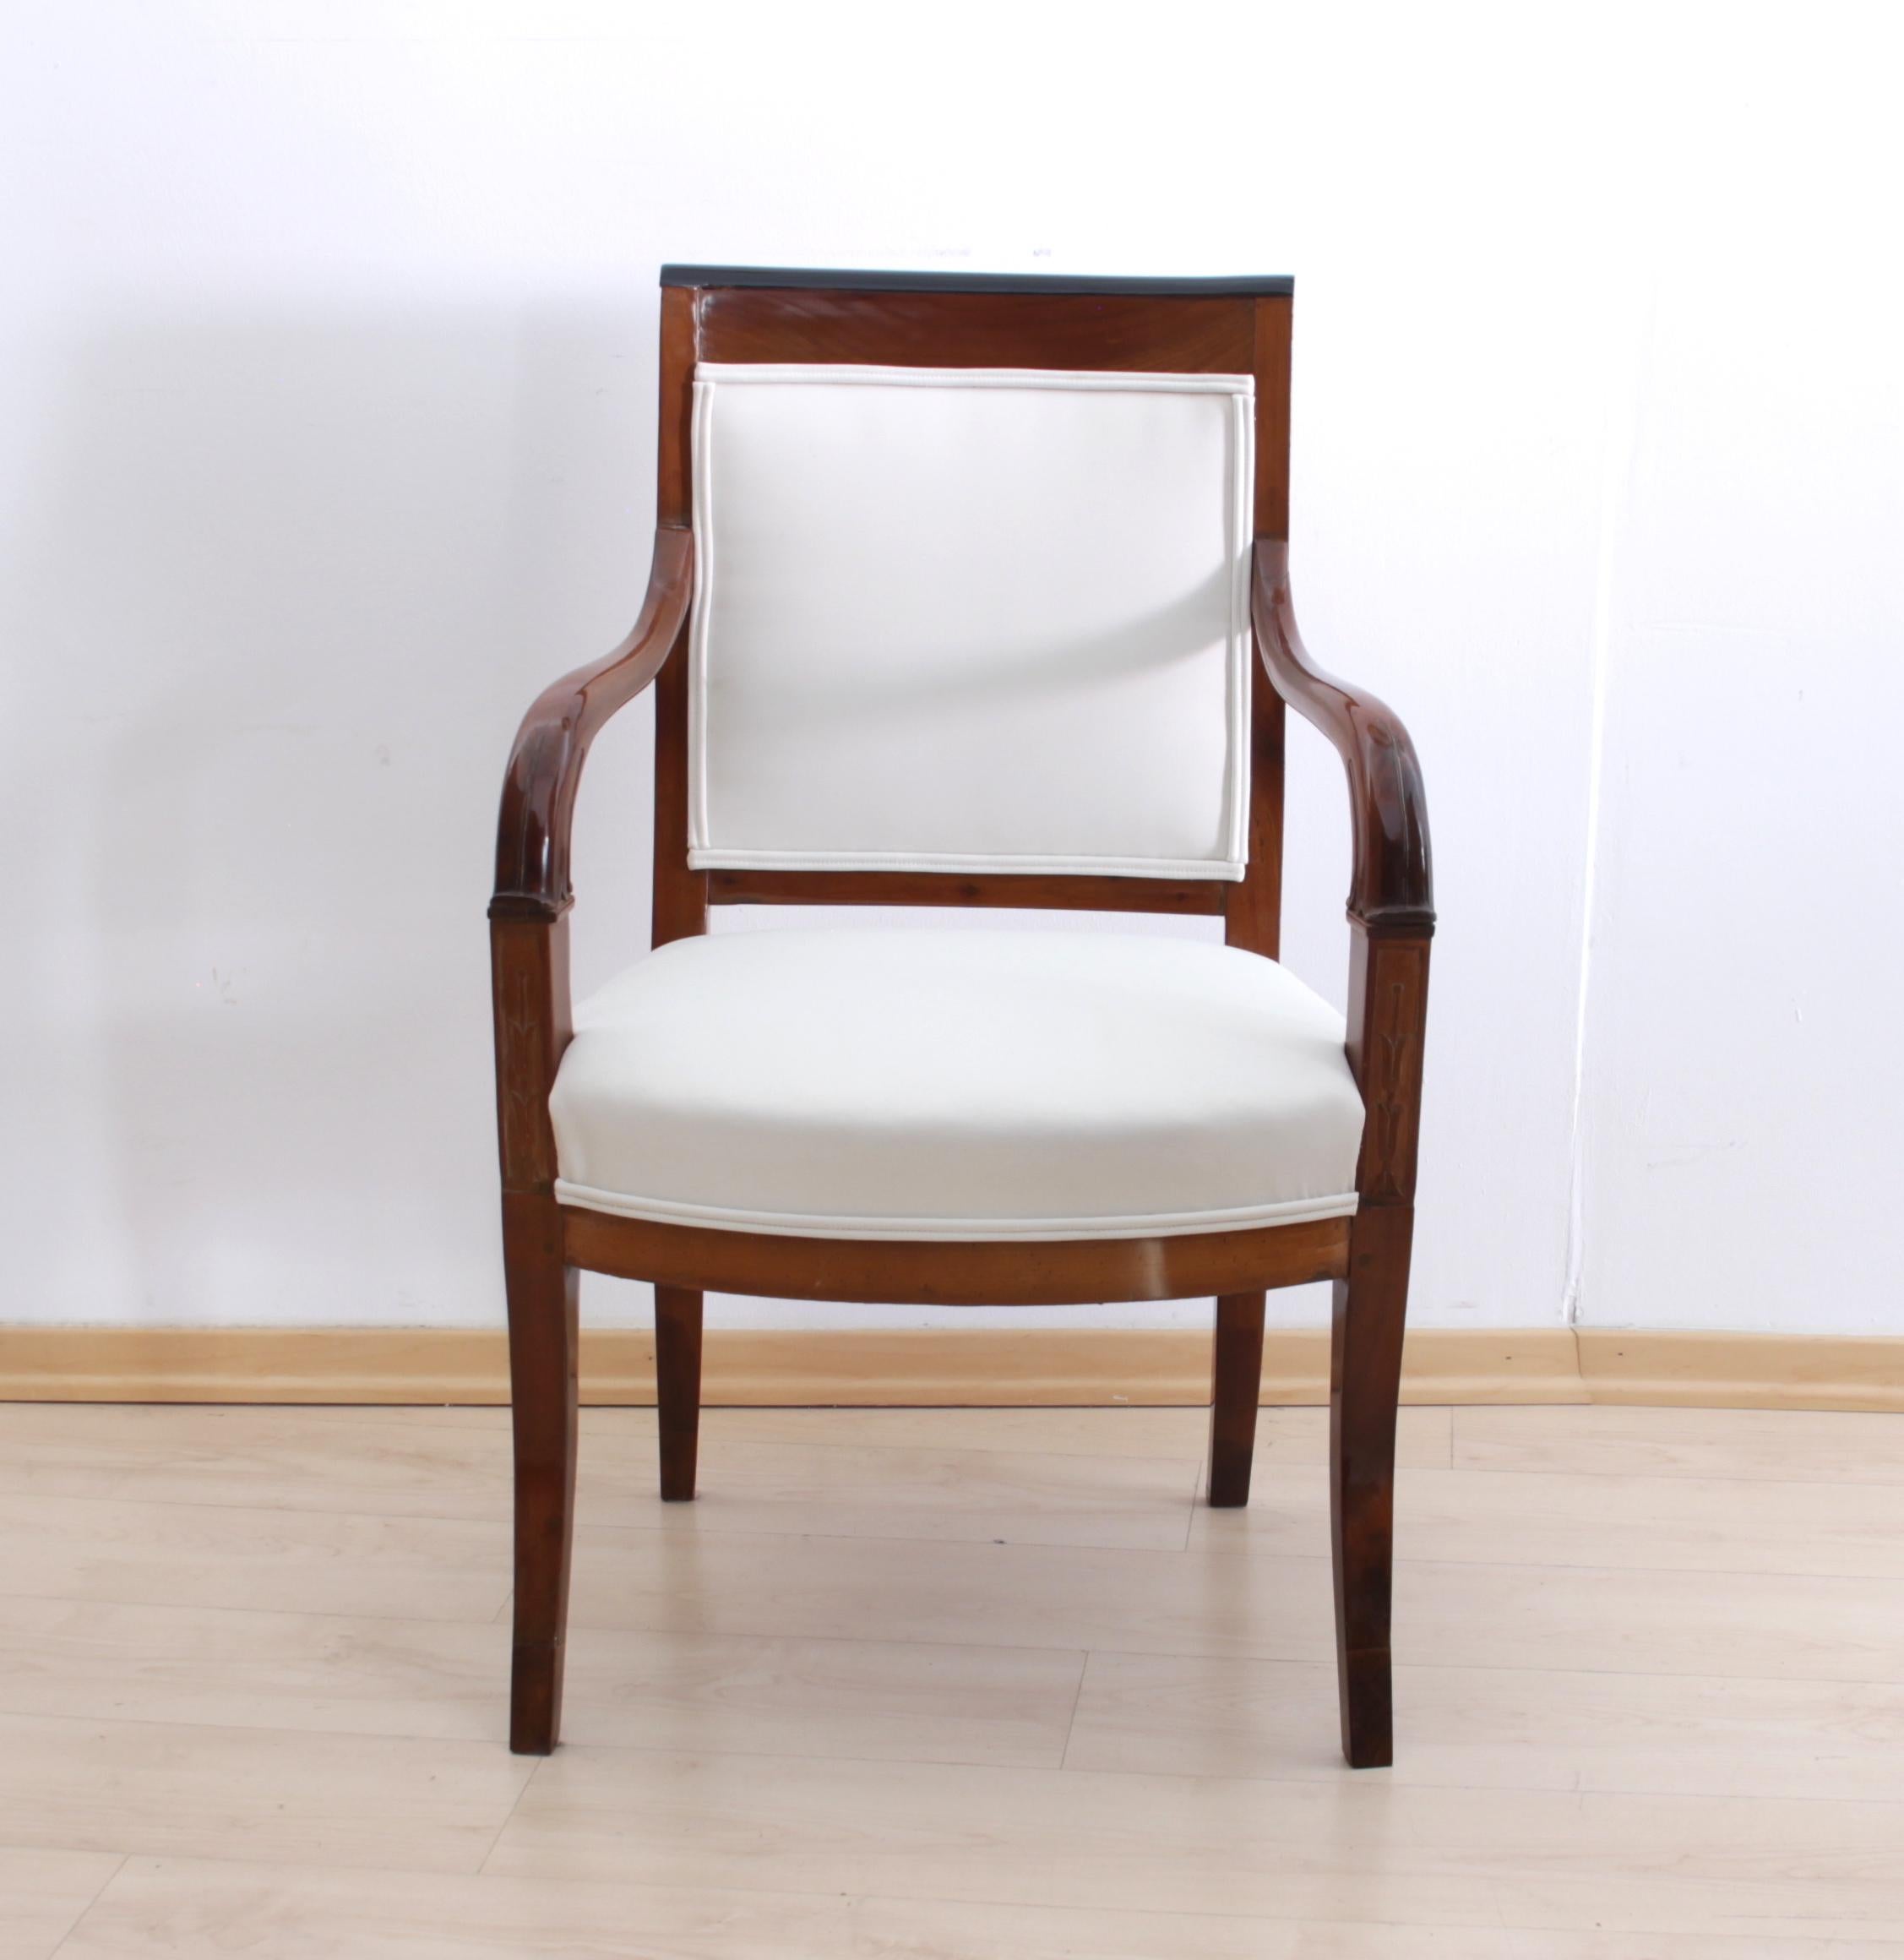 Elegant french Restauration Armchair from about 1820.

Cherry solid wood with carvings at the frontside of the armrests depicting vases and flower ranks. Ebonized strip at the top of the backrest. Great seating comfort.
The upholstery fabric is a